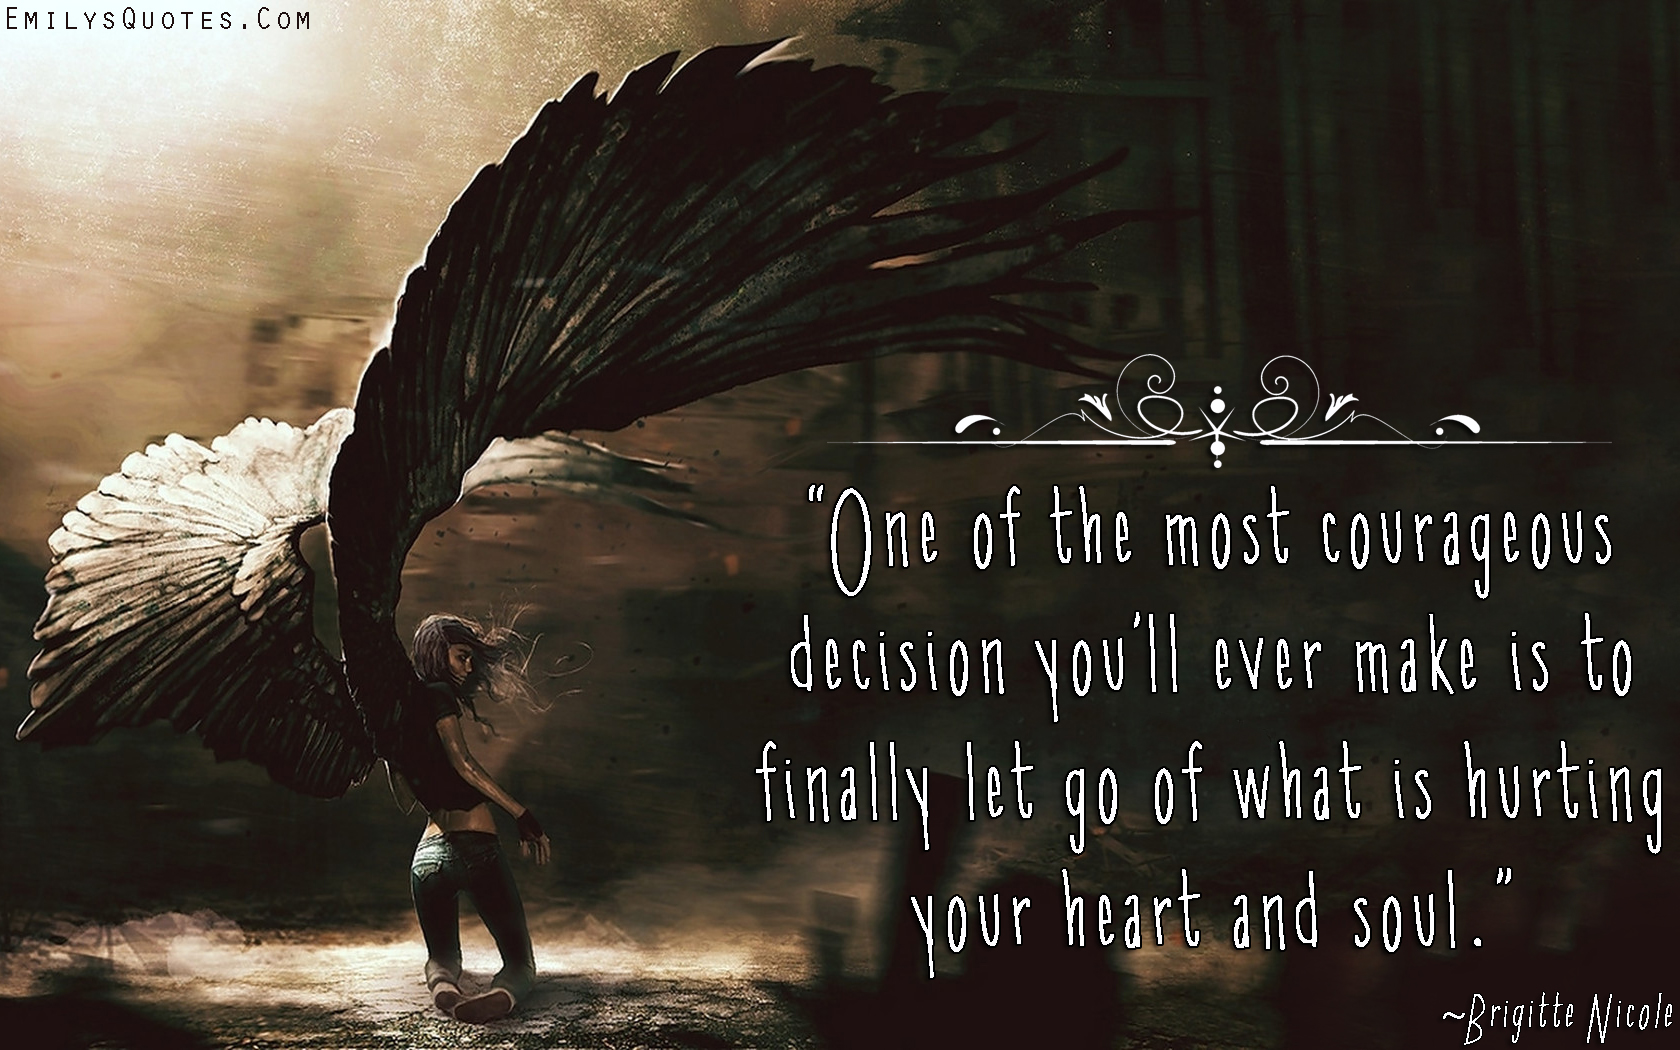 One of the most courageous decision you’ll ever make is to finally let go of what is hurting your heart and soul